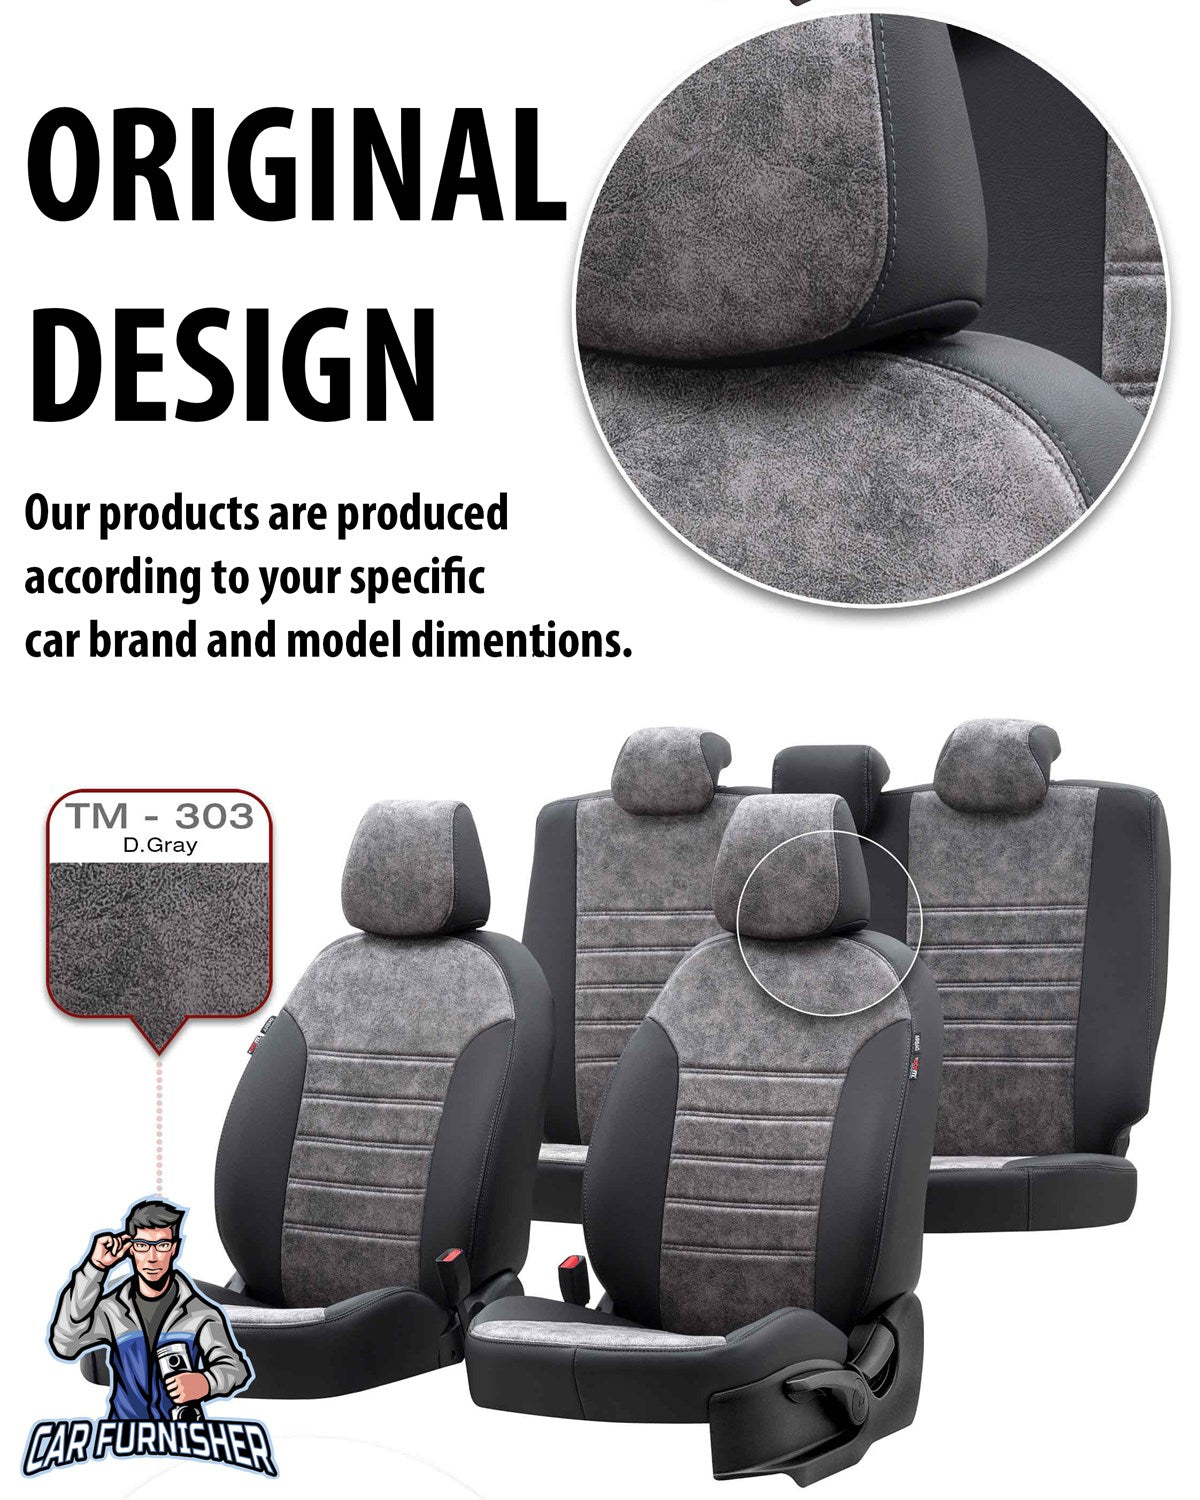 Fiat Bravo Seat Covers Milano Suede Design Burgundy Leather & Suede Fabric